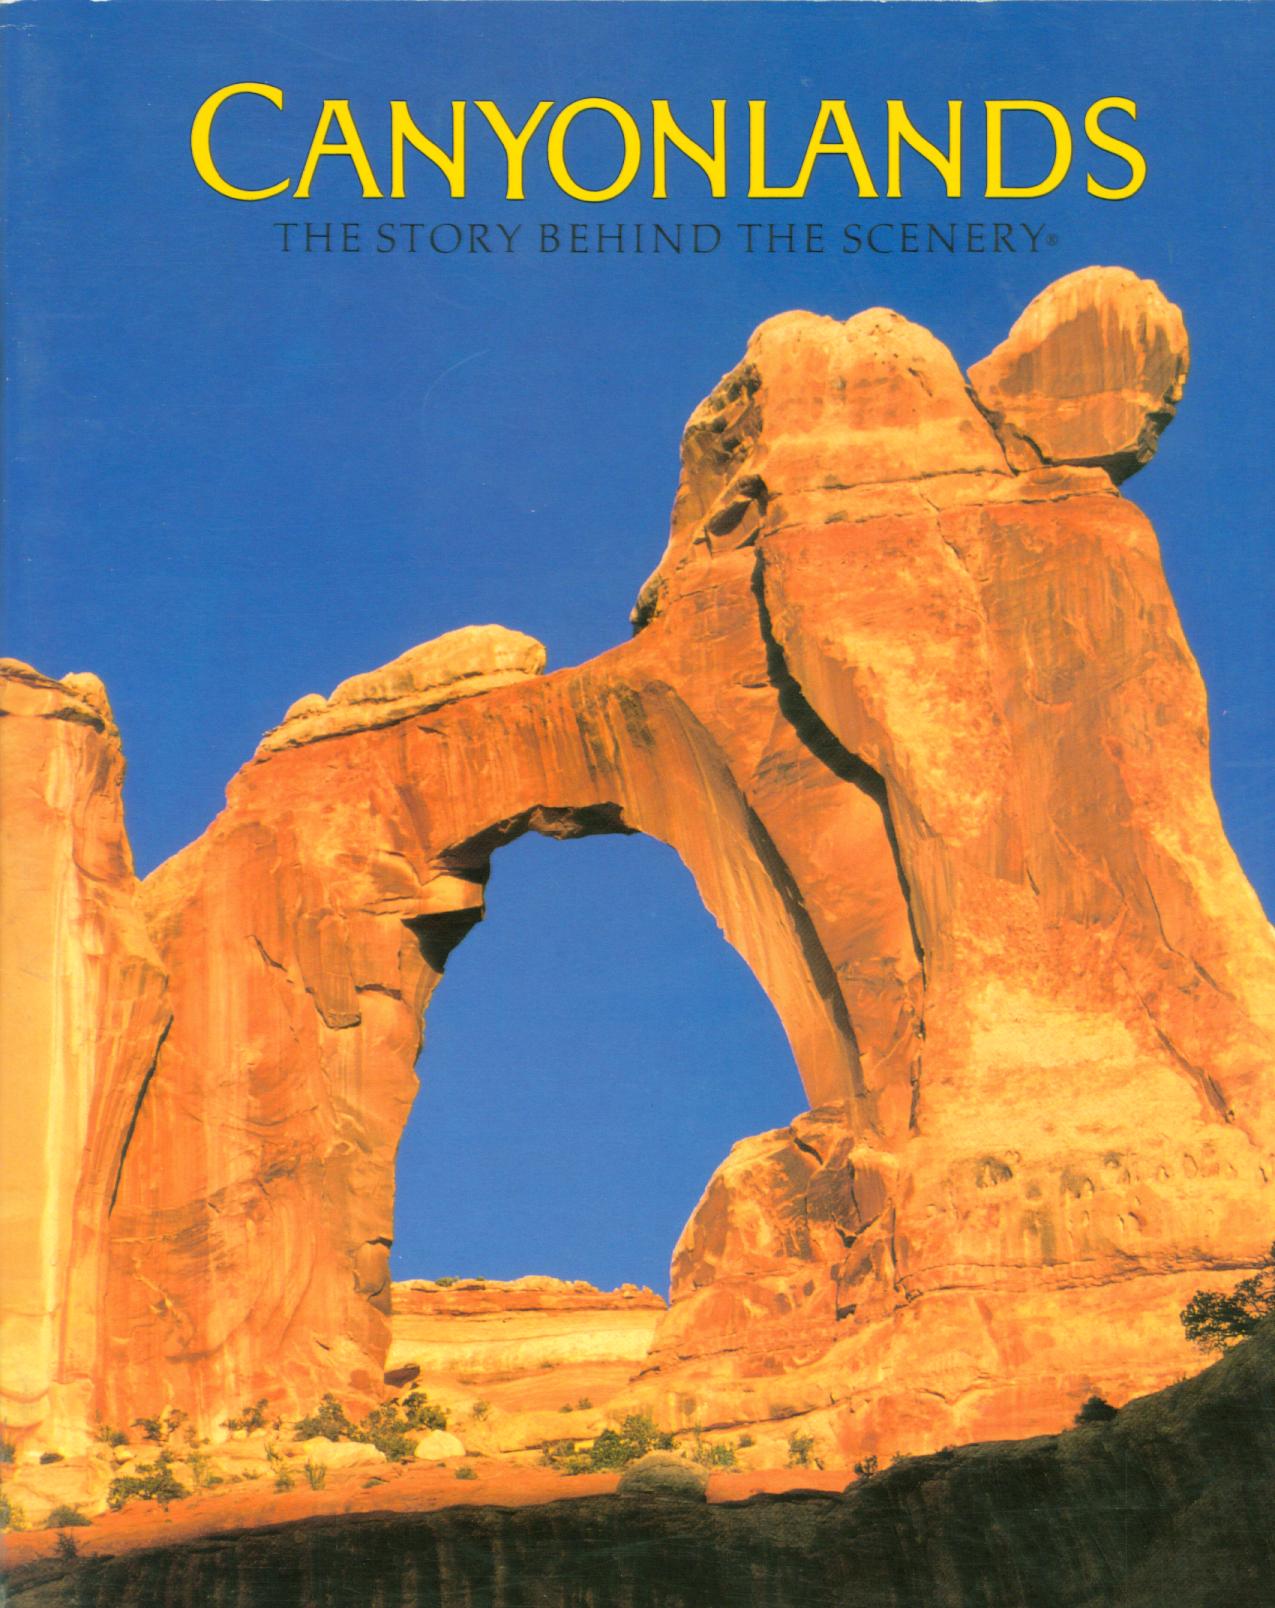 CANYONLANDS: the story behind the scenery (UT).